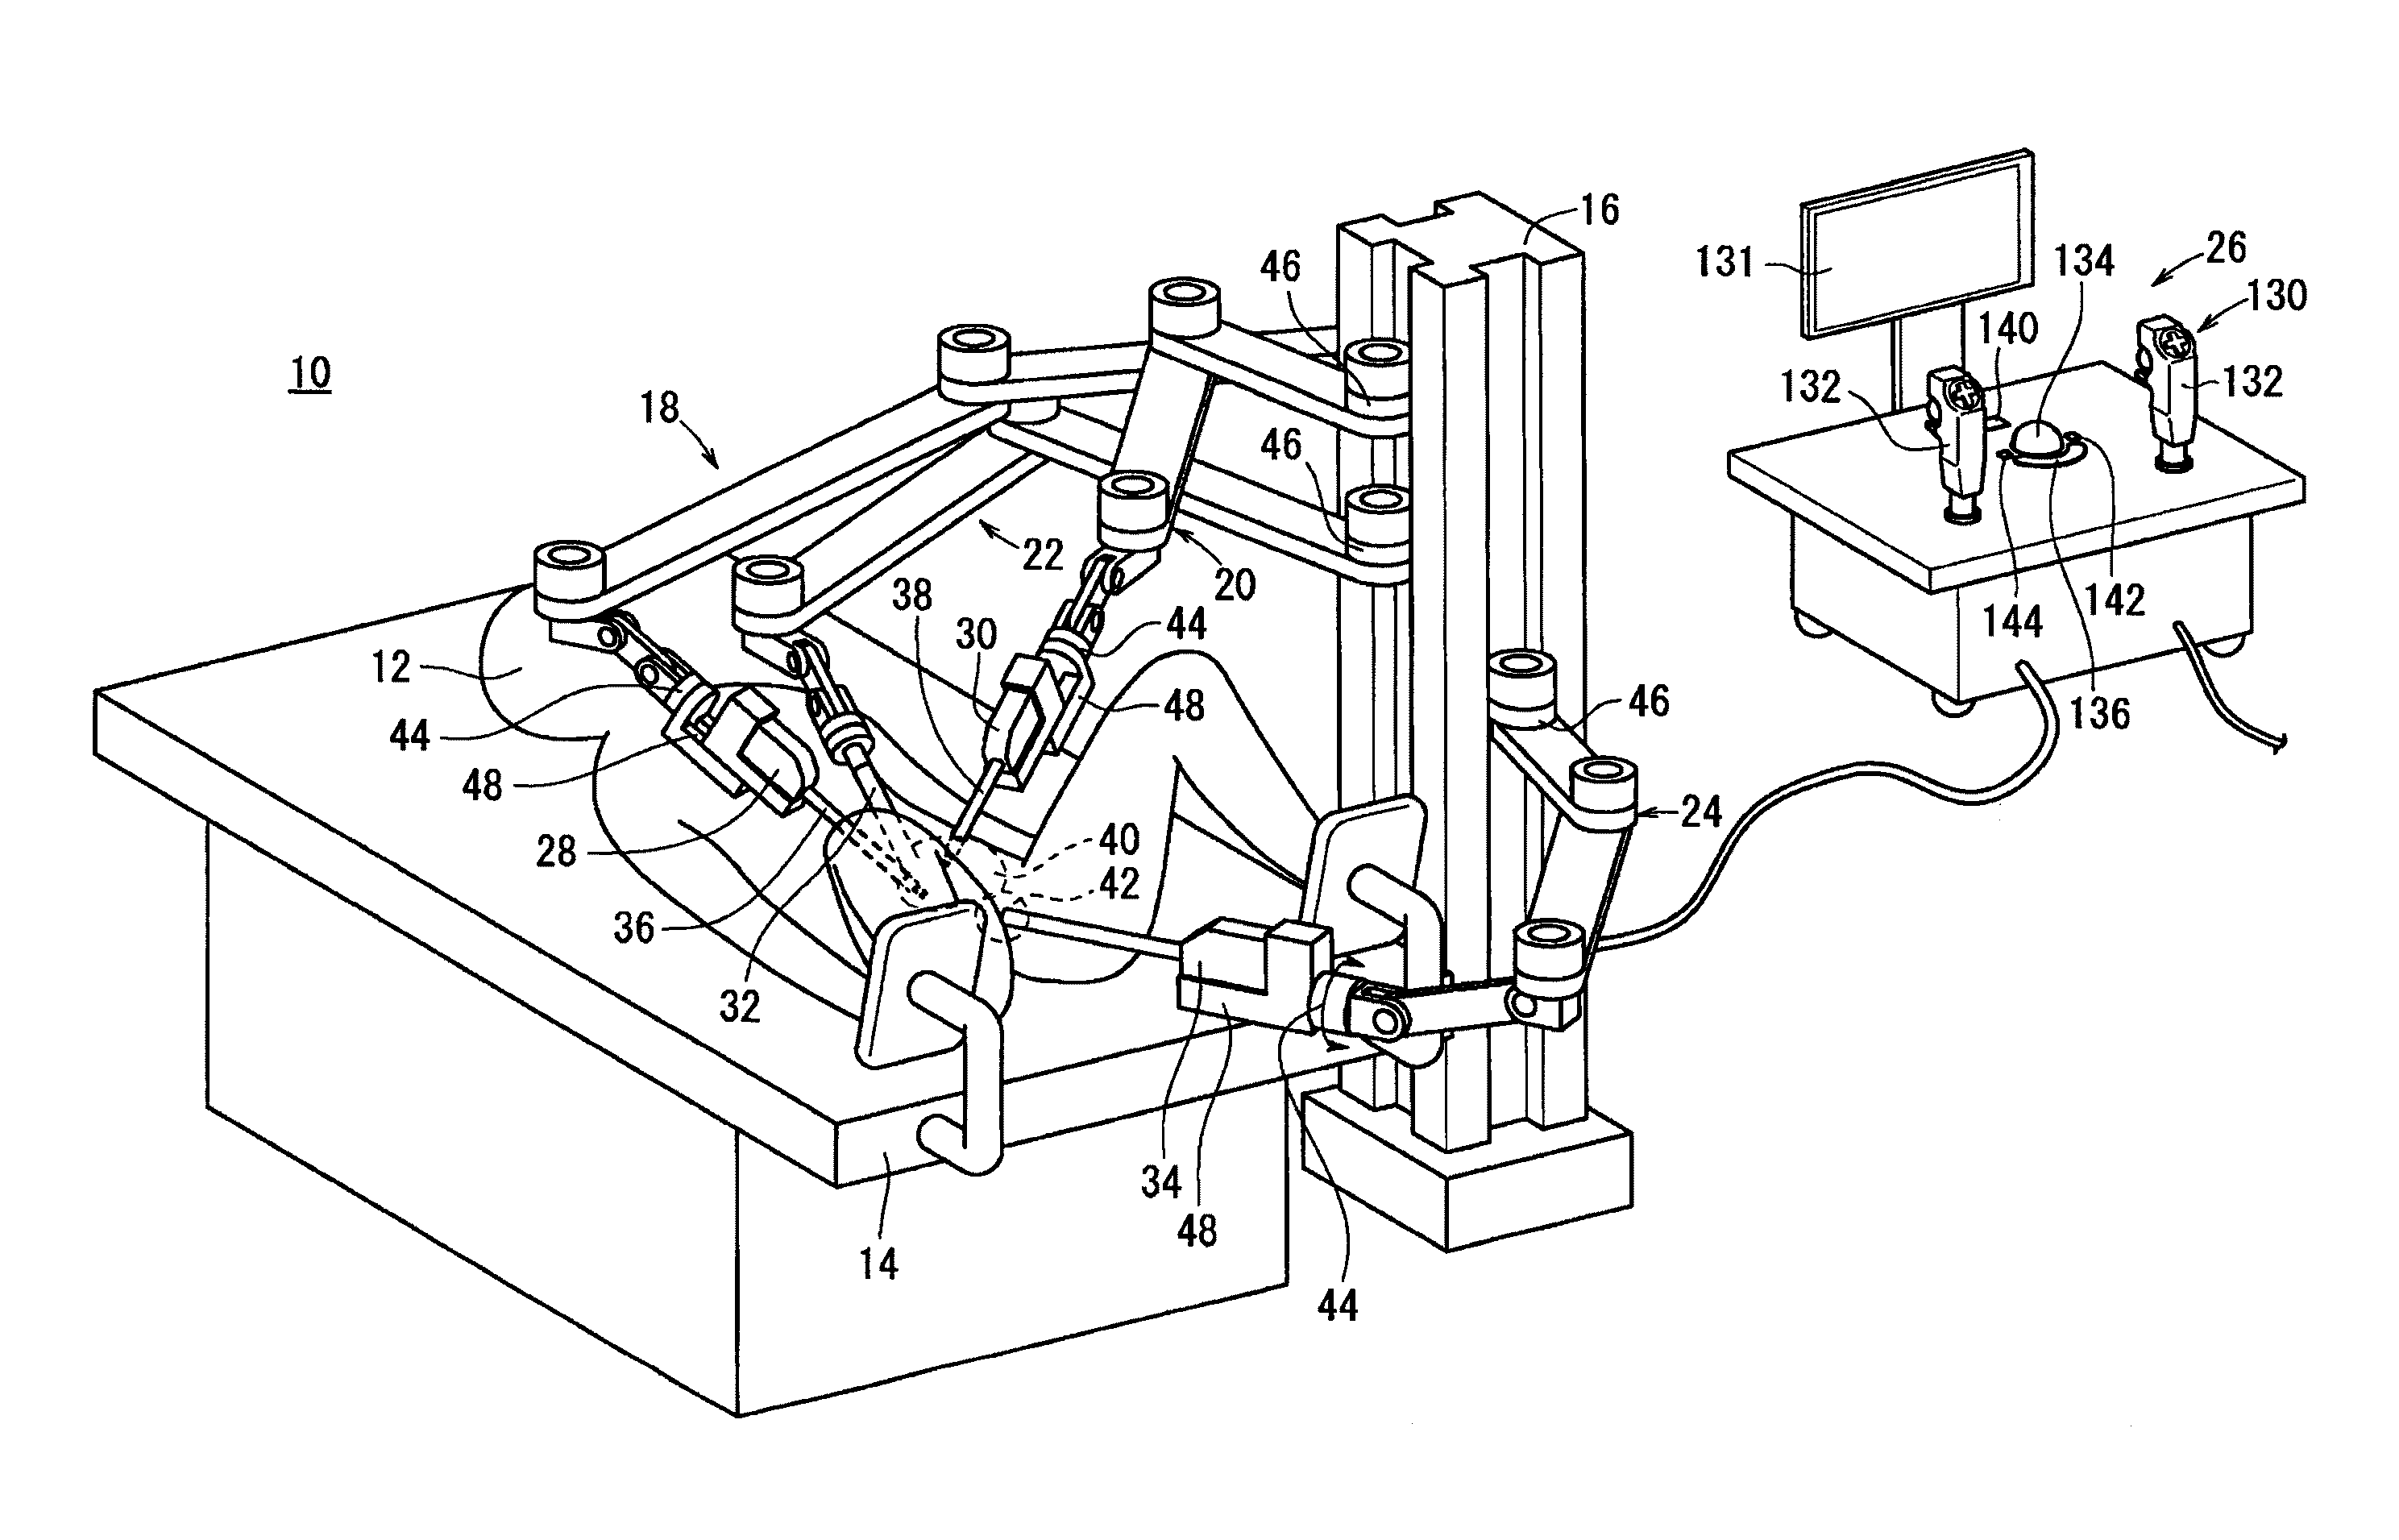 Medical robot system for supporting an organ in a position suitable for a medical treatment